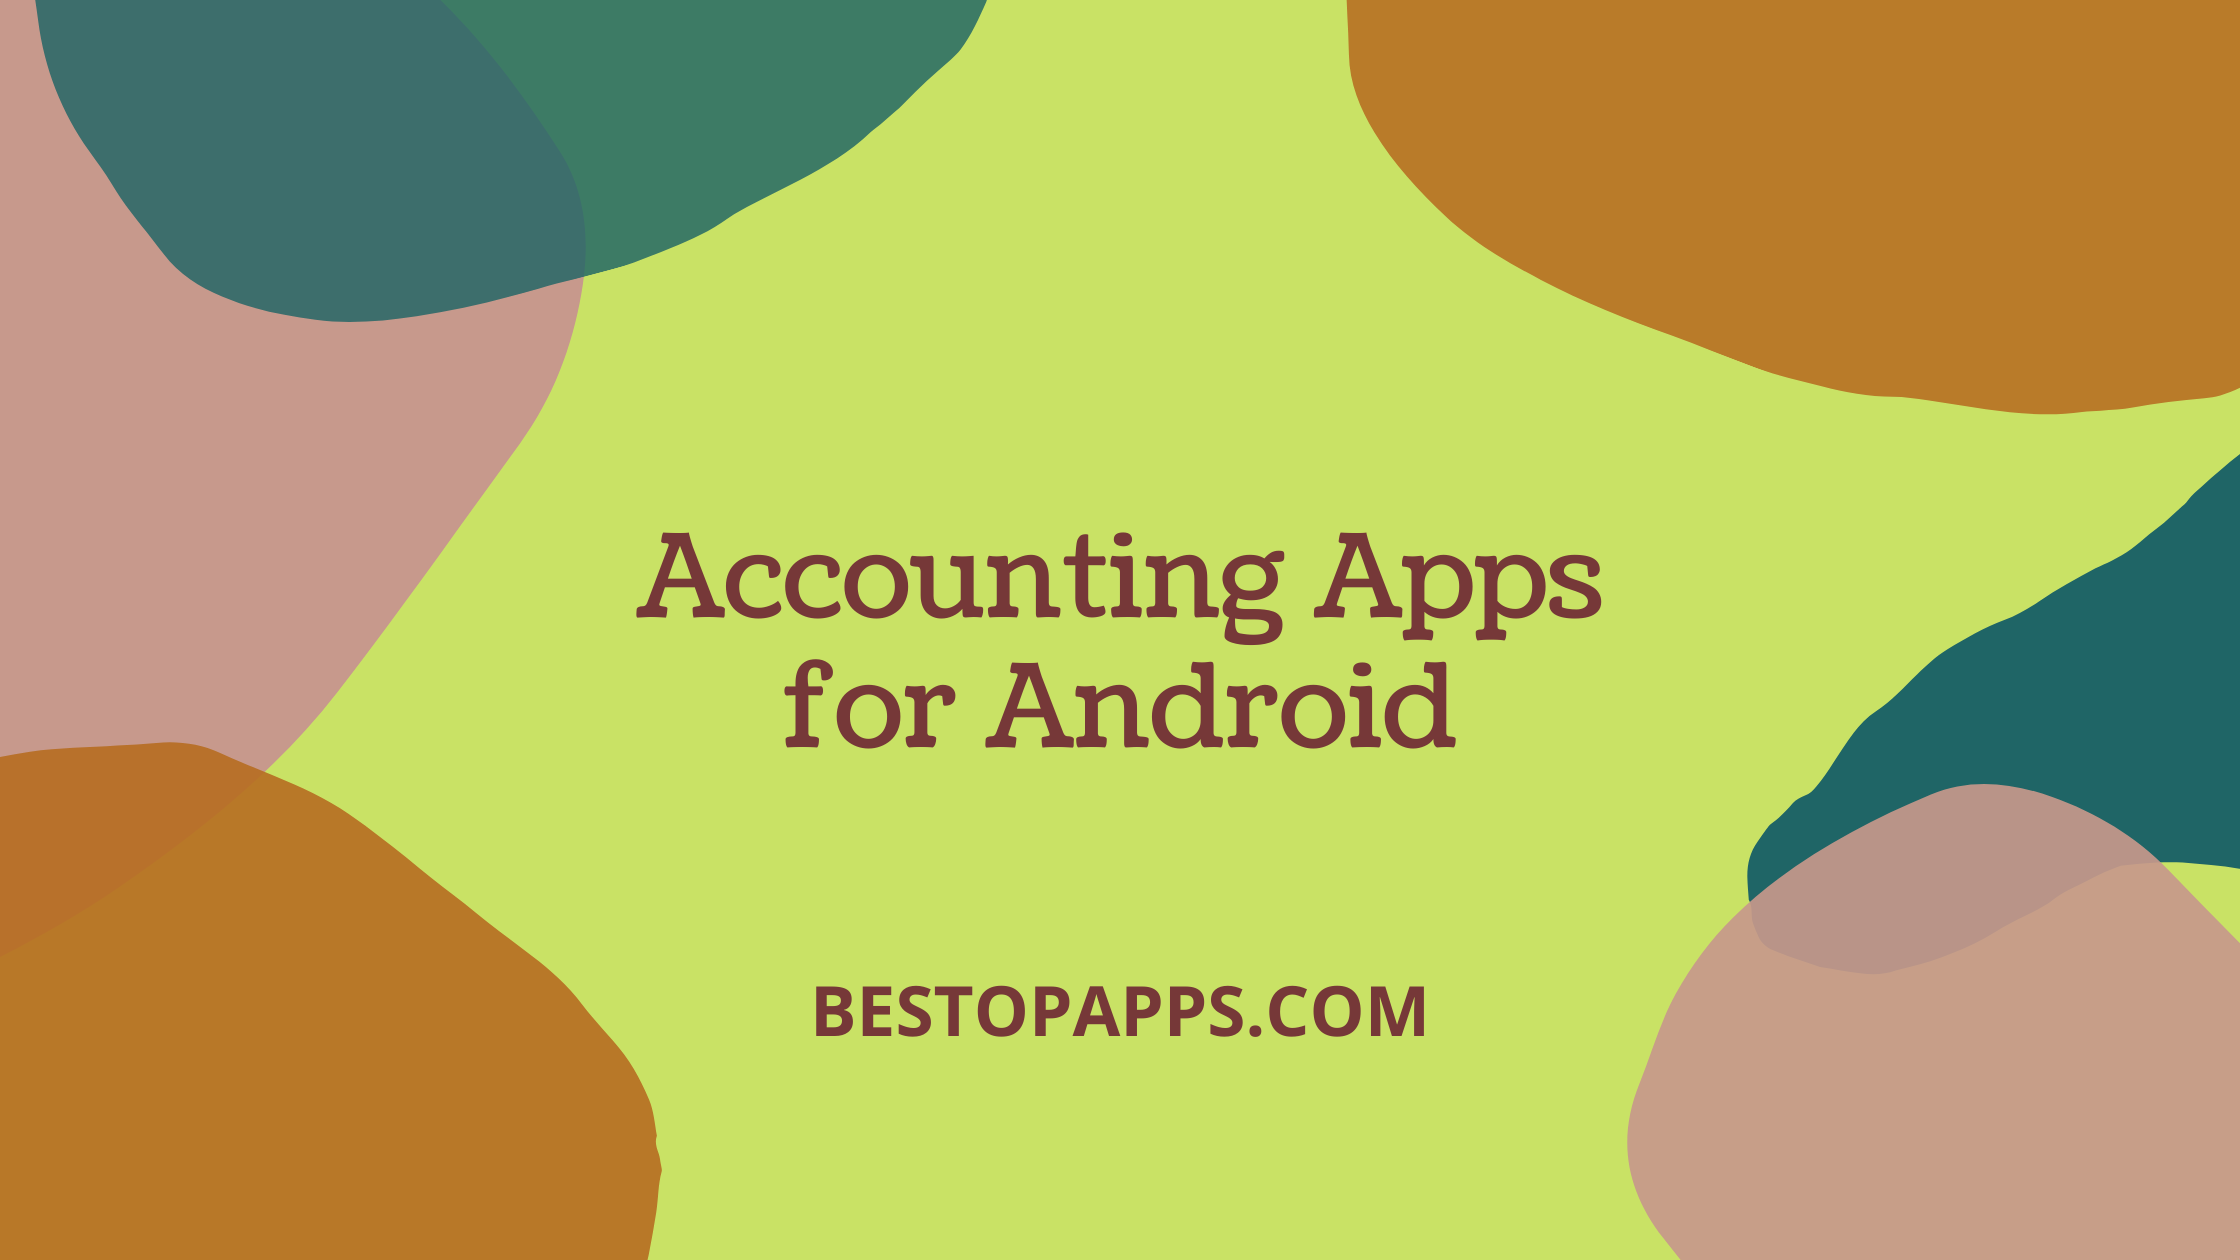 Accounting Apps for Android